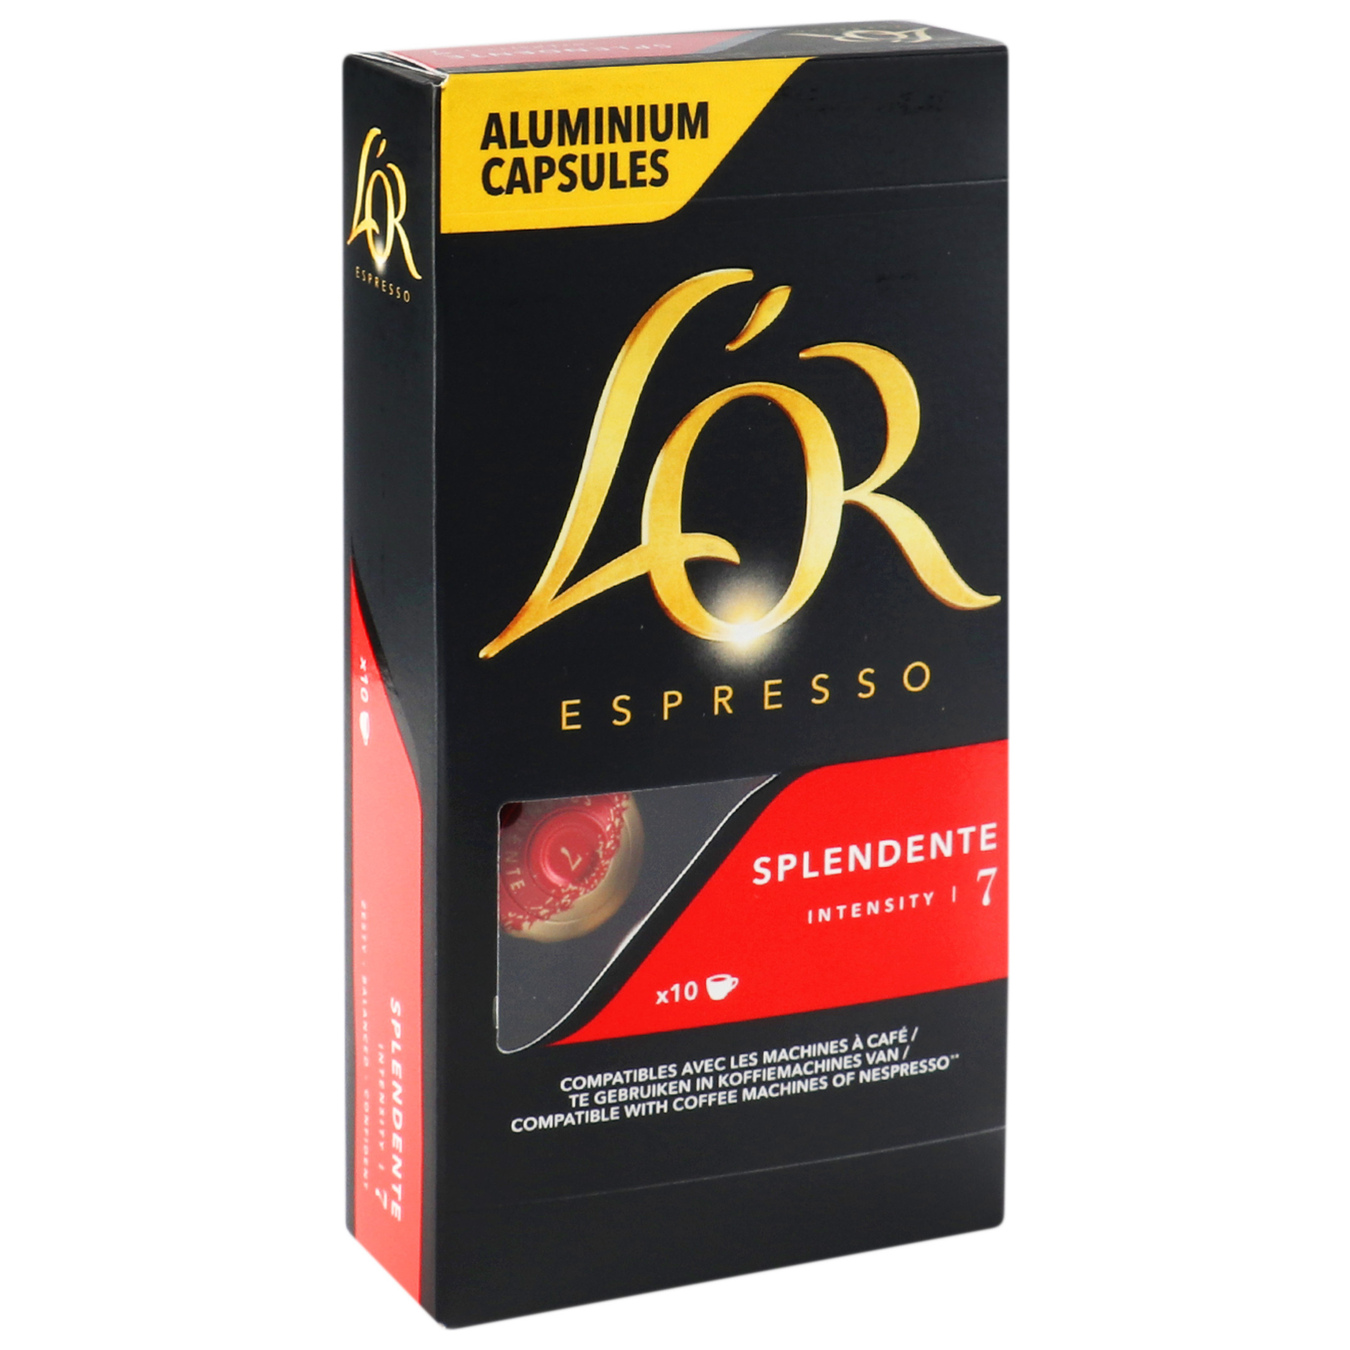 L'OR Espresso Splendente natural roasted ground coffee in capsules 10*52g 2